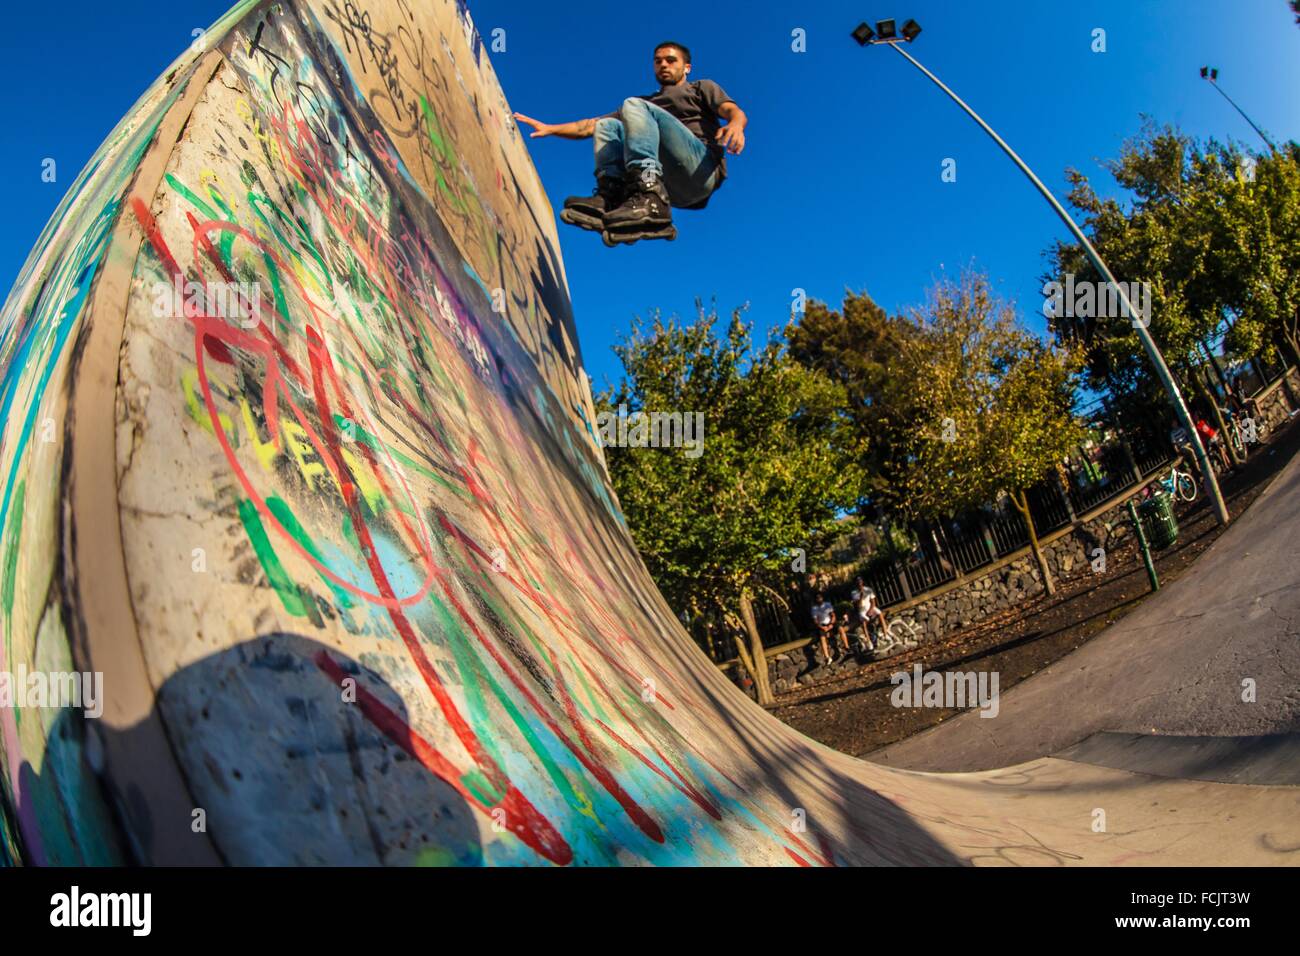 Inline Skating Man Not Rollerblading High Resolution Stock Photography and  Images - Alamy